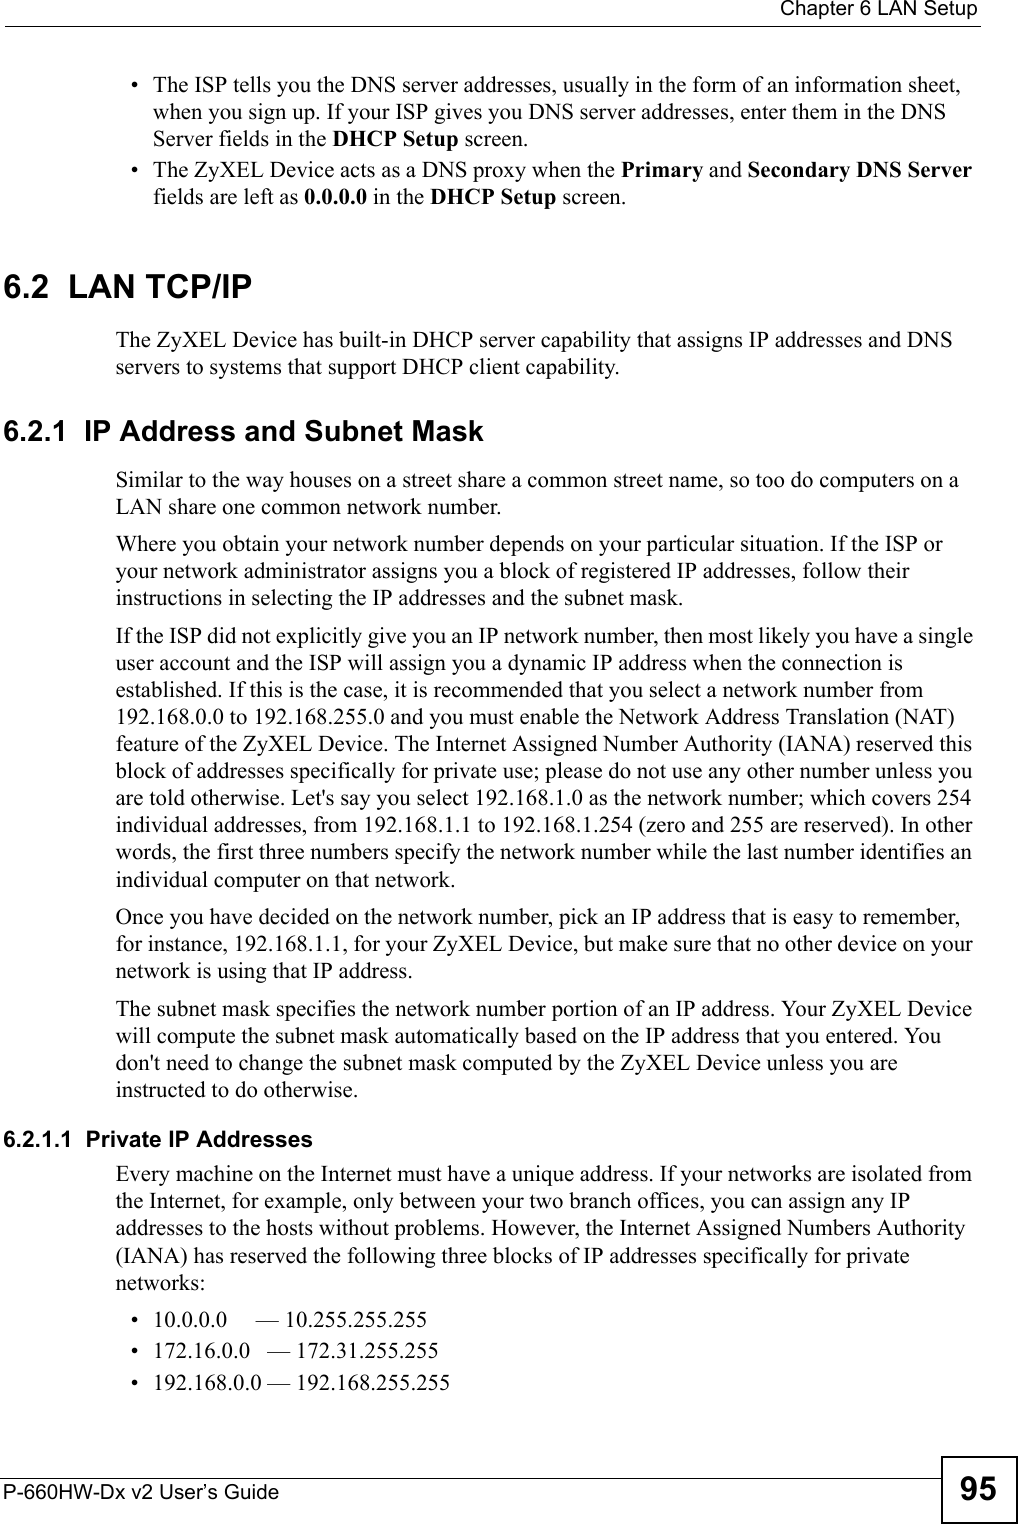  Chapter 6 LAN SetupP-660HW-Dx v2 User’s Guide 95• The ISP tells you the DNS server addresses, usually in the form of an information sheet, when you sign up. If your ISP gives you DNS server addresses, enter them in the DNS Server fields in the DHCP Setup screen.• The ZyXEL Device acts as a DNS proxy when the Primary and Secondary DNS Server fields are left as 0.0.0.0 in the DHCP Setup screen.6.2  LAN TCP/IP The ZyXEL Device has built-in DHCP server capability that assigns IP addresses and DNS servers to systems that support DHCP client capability.6.2.1  IP Address and Subnet MaskSimilar to the way houses on a street share a common street name, so too do computers on a LAN share one common network number.Where you obtain your network number depends on your particular situation. If the ISP or your network administrator assigns you a block of registered IP addresses, follow their instructions in selecting the IP addresses and the subnet mask.If the ISP did not explicitly give you an IP network number, then most likely you have a single user account and the ISP will assign you a dynamic IP address when the connection is established. If this is the case, it is recommended that you select a network number from 192.168.0.0 to 192.168.255.0 and you must enable the Network Address Translation (NAT) feature of the ZyXEL Device. The Internet Assigned Number Authority (IANA) reserved this block of addresses specifically for private use; please do not use any other number unless you are told otherwise. Let&apos;s say you select 192.168.1.0 as the network number; which covers 254 individual addresses, from 192.168.1.1 to 192.168.1.254 (zero and 255 are reserved). In other words, the first three numbers specify the network number while the last number identifies an individual computer on that network.Once you have decided on the network number, pick an IP address that is easy to remember, for instance, 192.168.1.1, for your ZyXEL Device, but make sure that no other device on your network is using that IP address.The subnet mask specifies the network number portion of an IP address. Your ZyXEL Device will compute the subnet mask automatically based on the IP address that you entered. You don&apos;t need to change the subnet mask computed by the ZyXEL Device unless you are instructed to do otherwise.6.2.1.1  Private IP AddressesEvery machine on the Internet must have a unique address. If your networks are isolated from the Internet, for example, only between your two branch offices, you can assign any IP addresses to the hosts without problems. However, the Internet Assigned Numbers Authority (IANA) has reserved the following three blocks of IP addresses specifically for private networks:• 10.0.0.0     — 10.255.255.255• 172.16.0.0   — 172.31.255.255• 192.168.0.0 — 192.168.255.255